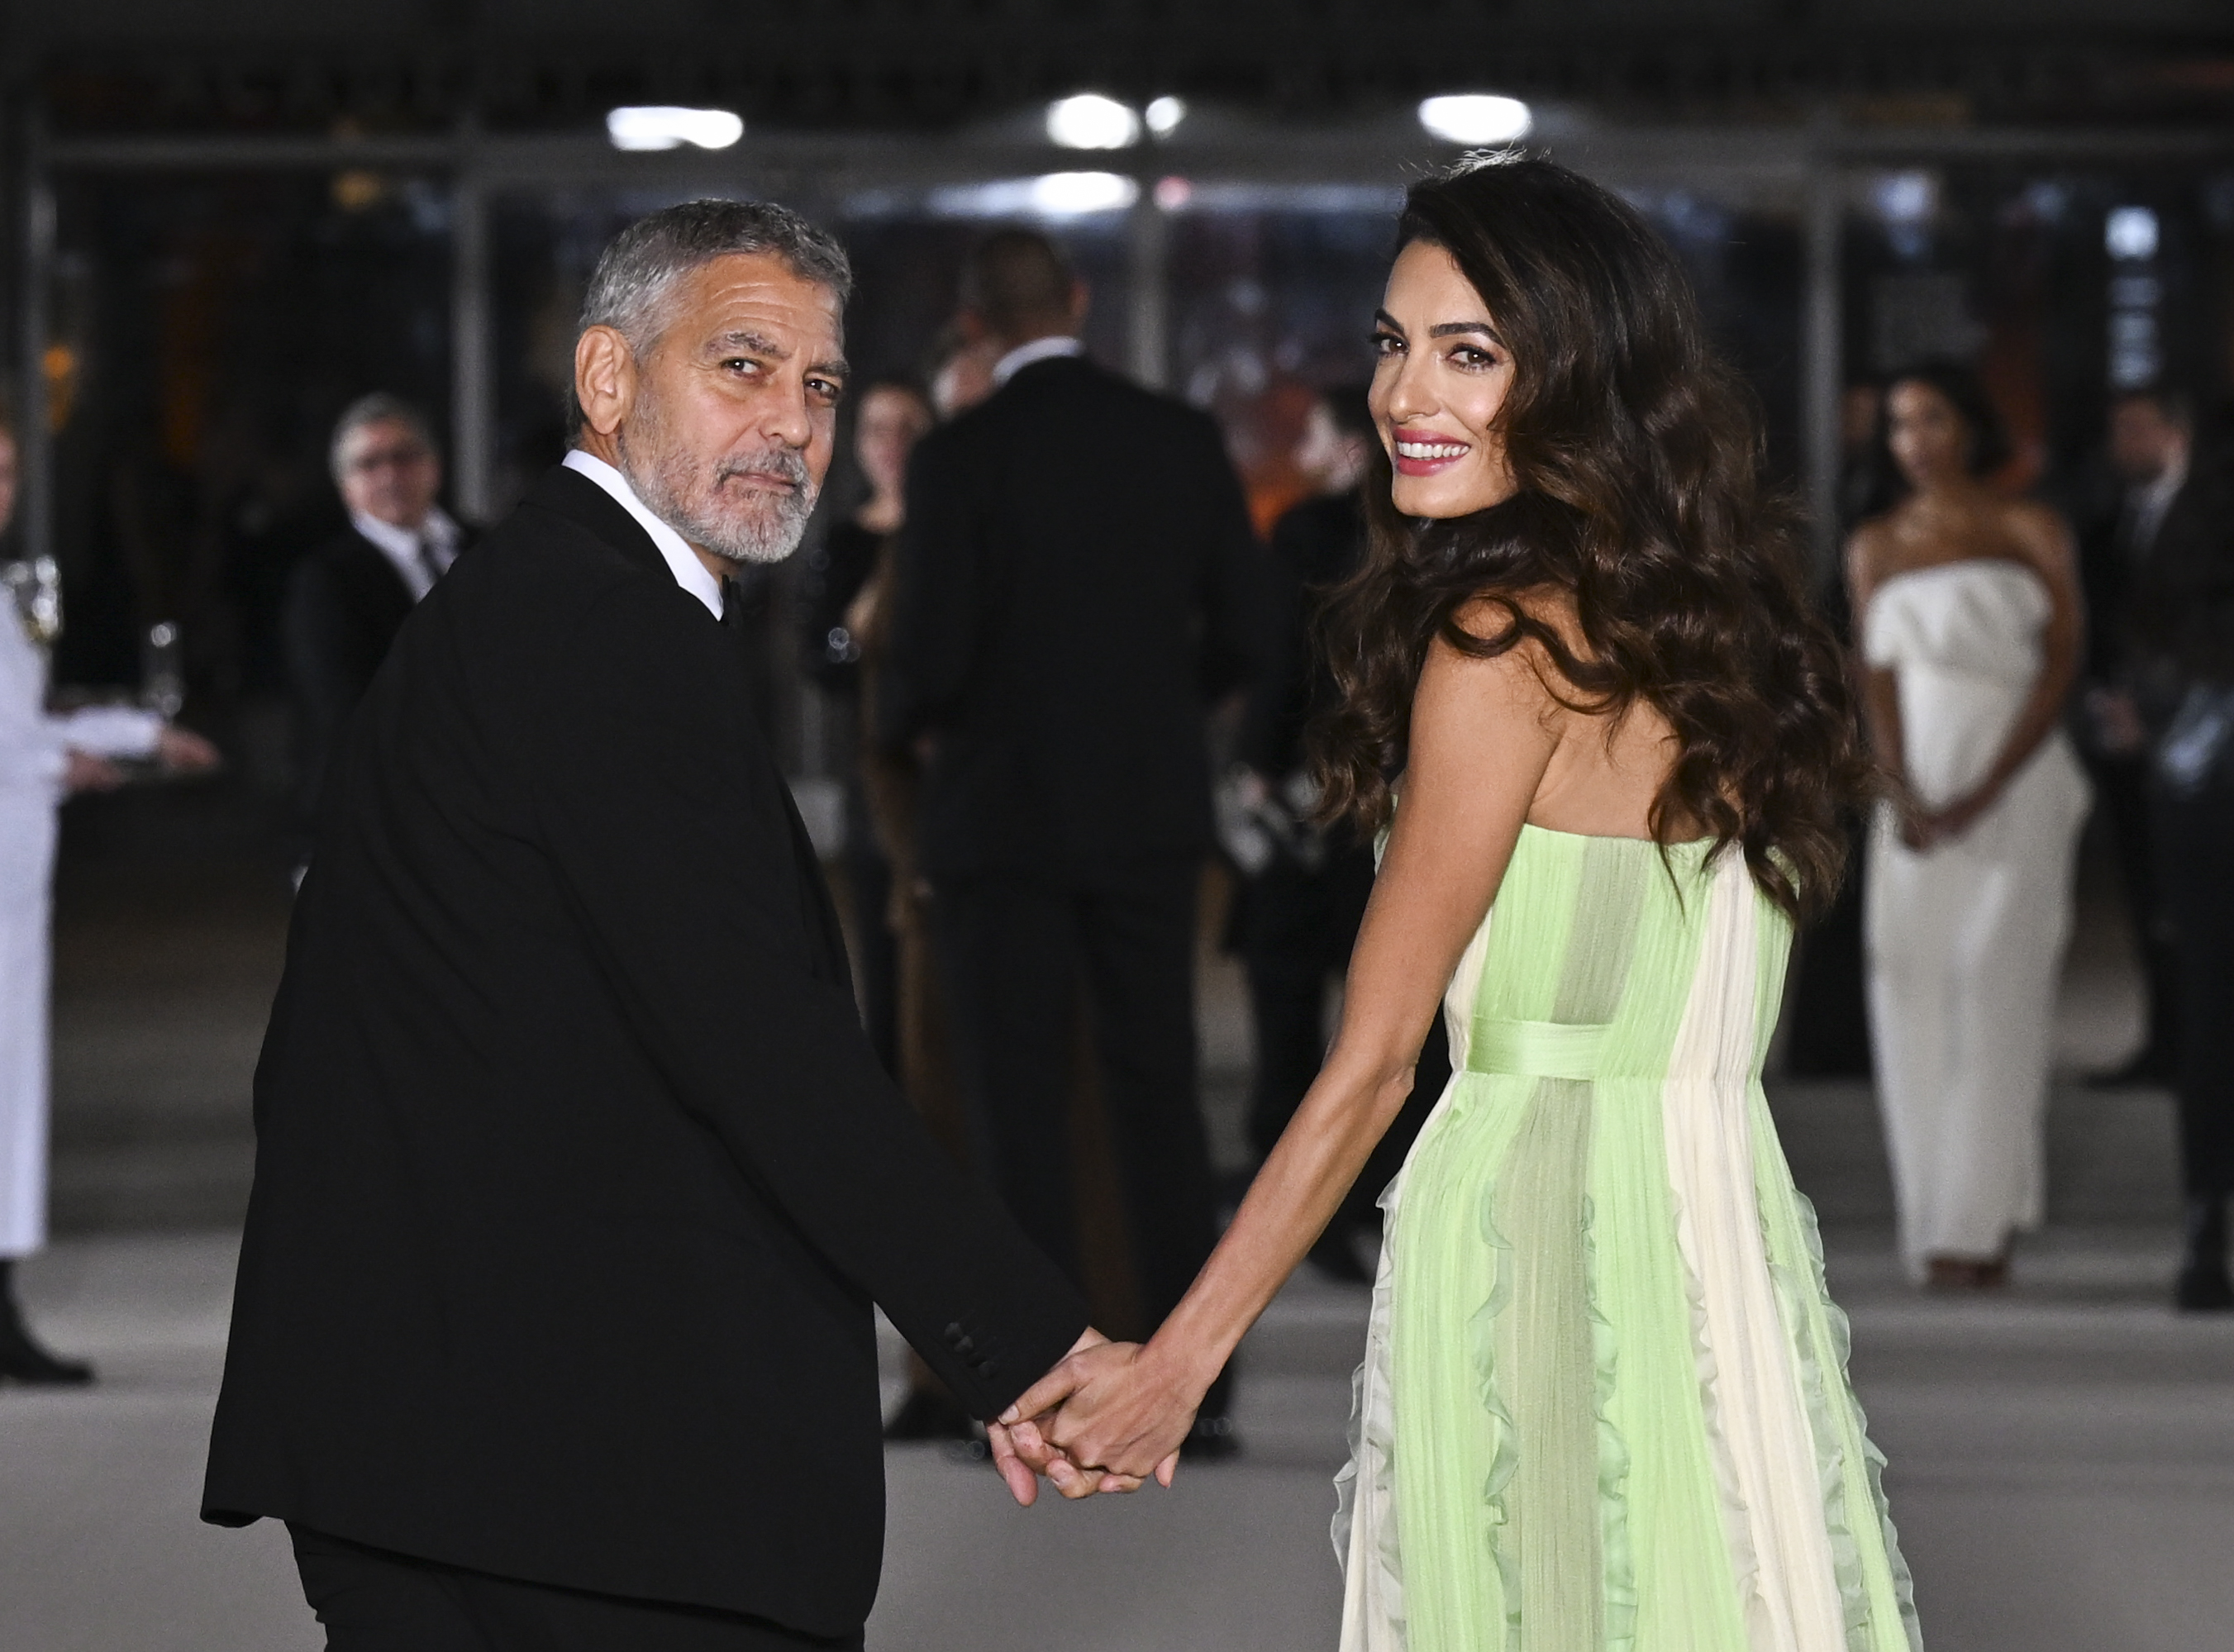 George and Amal Clooney at the 2nd Annual Academy Museum Gala in Los Angeles, California on October 15, 2022 | Source: Getty Images